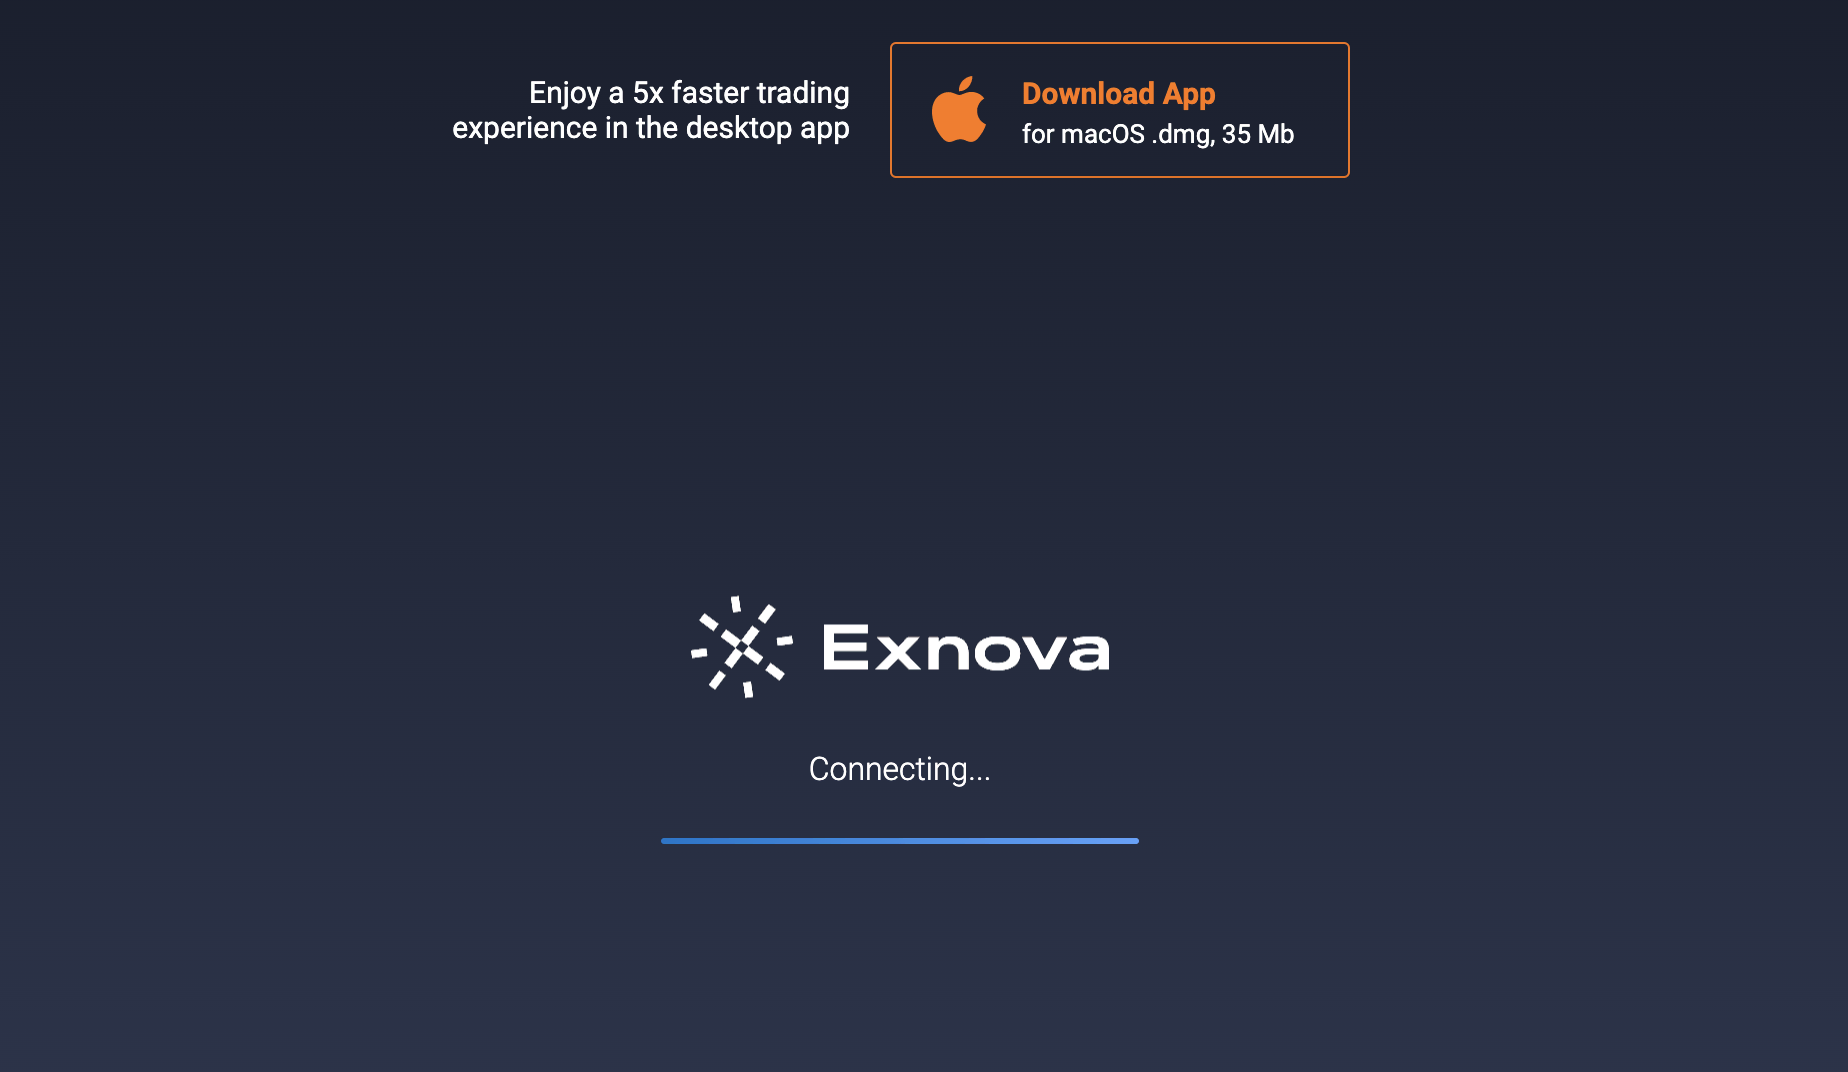 How to download the Exnova mobile app